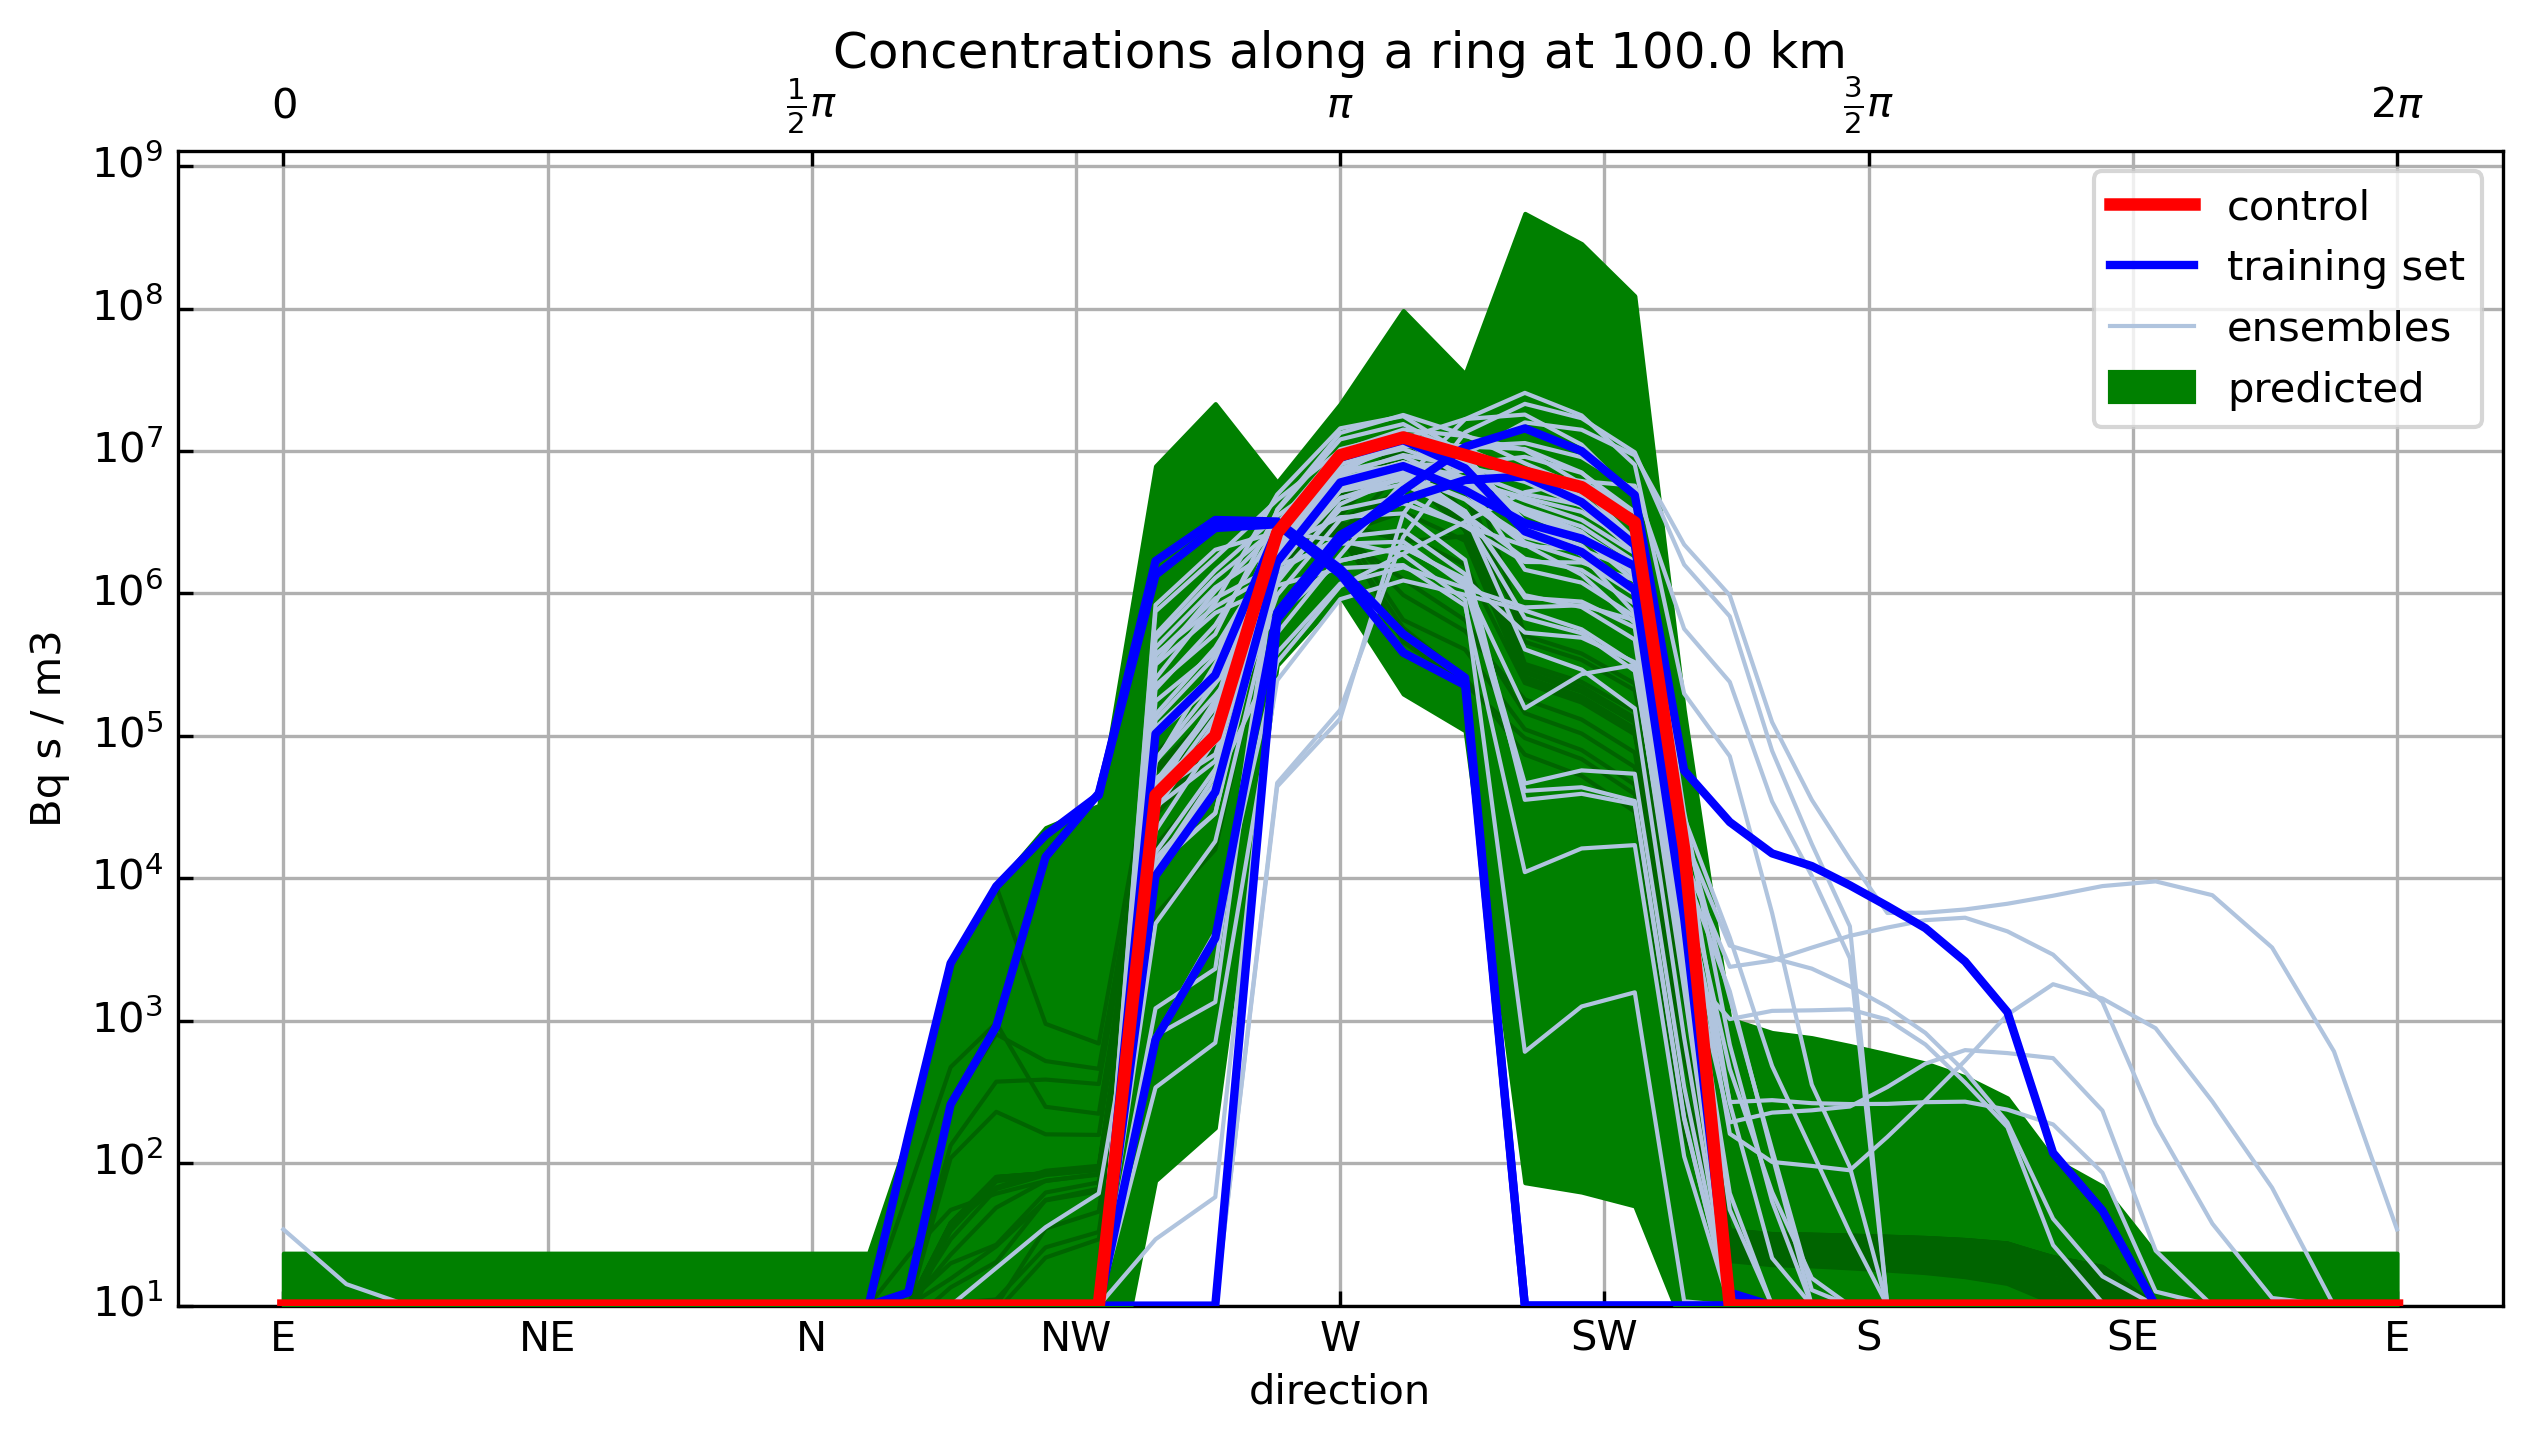 Comparison of the GPR surrogate model and ensemble on a ring at a given distance © ENEA